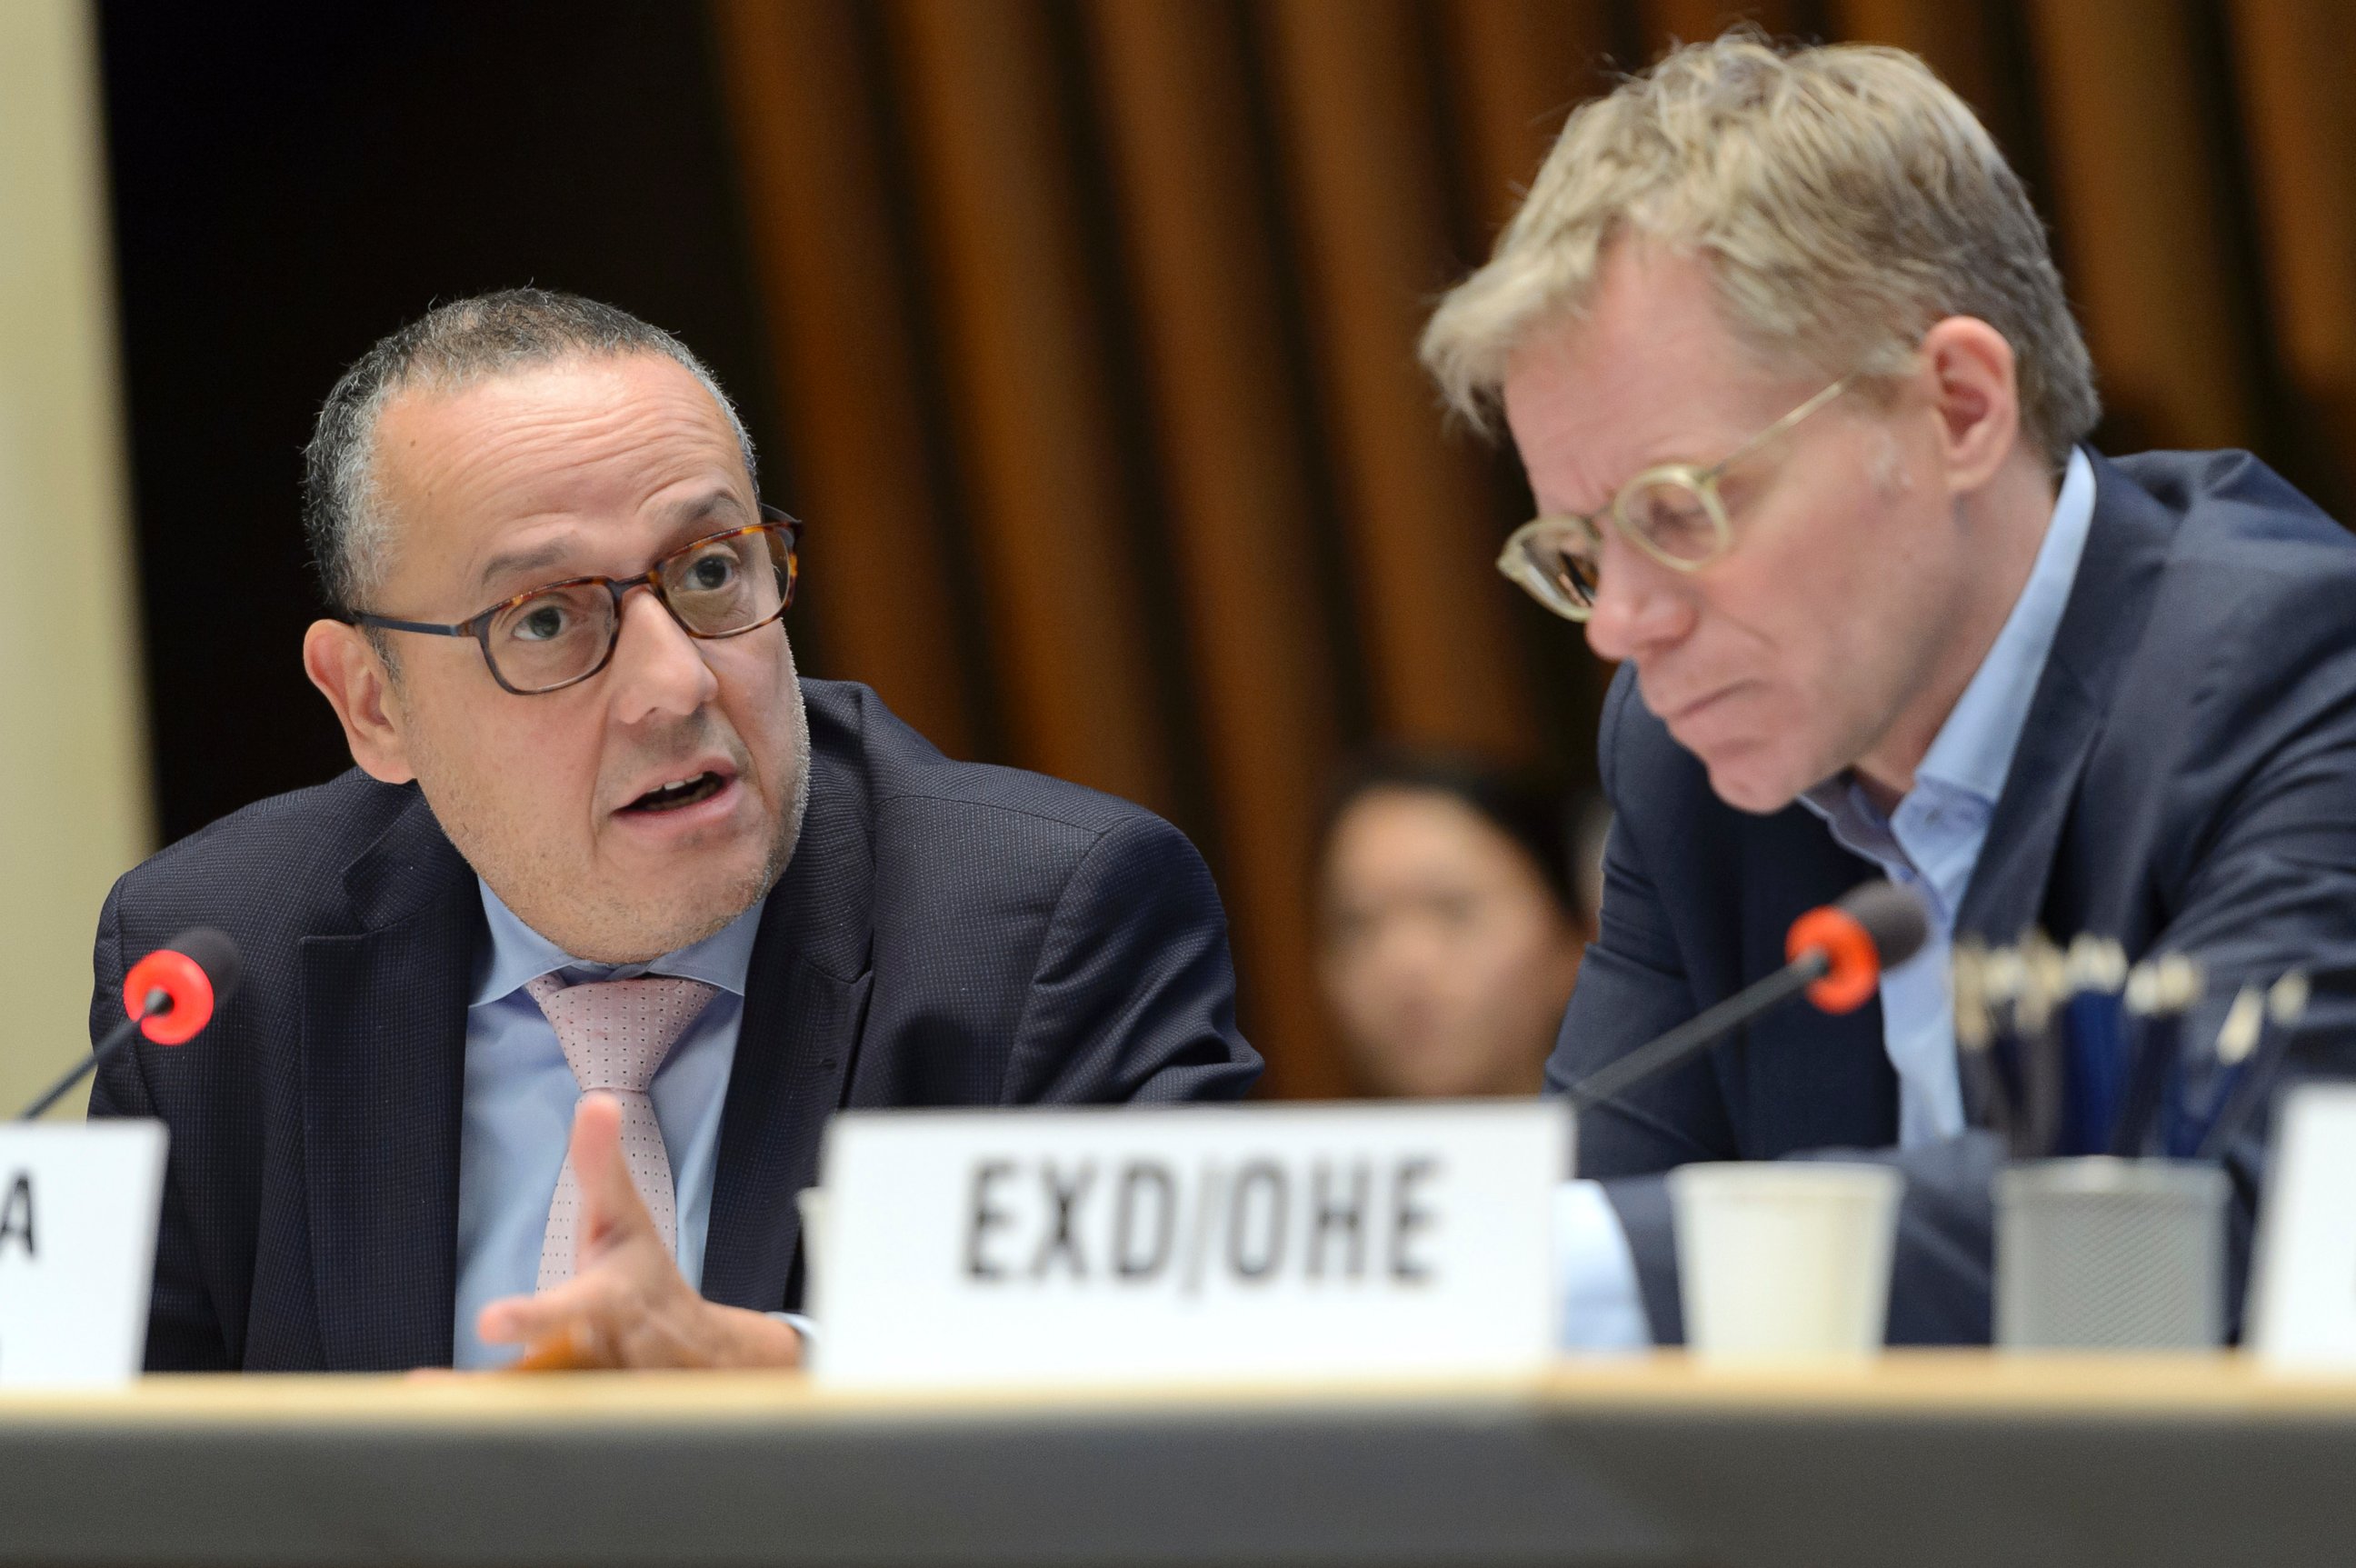 PHOTO: Marcos Espinal and Bruce Aylward speak during a WHO Executive Board session at WHO headquarters in Geneva, Switzerland, Jan. 28, 2016.